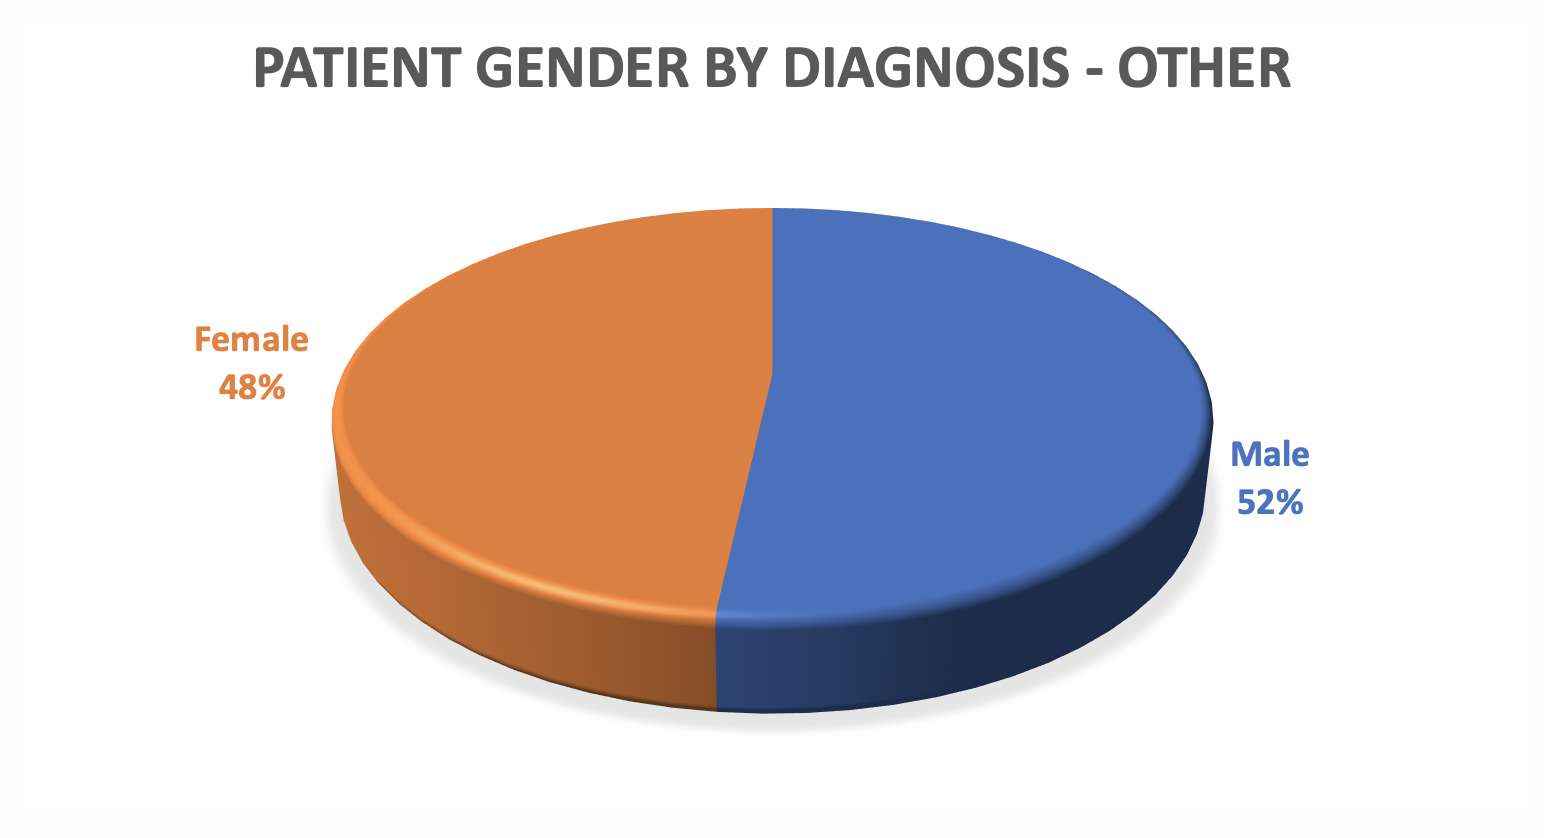 image of pie chart reveals patient gender data for other ABI at Pate Rehab